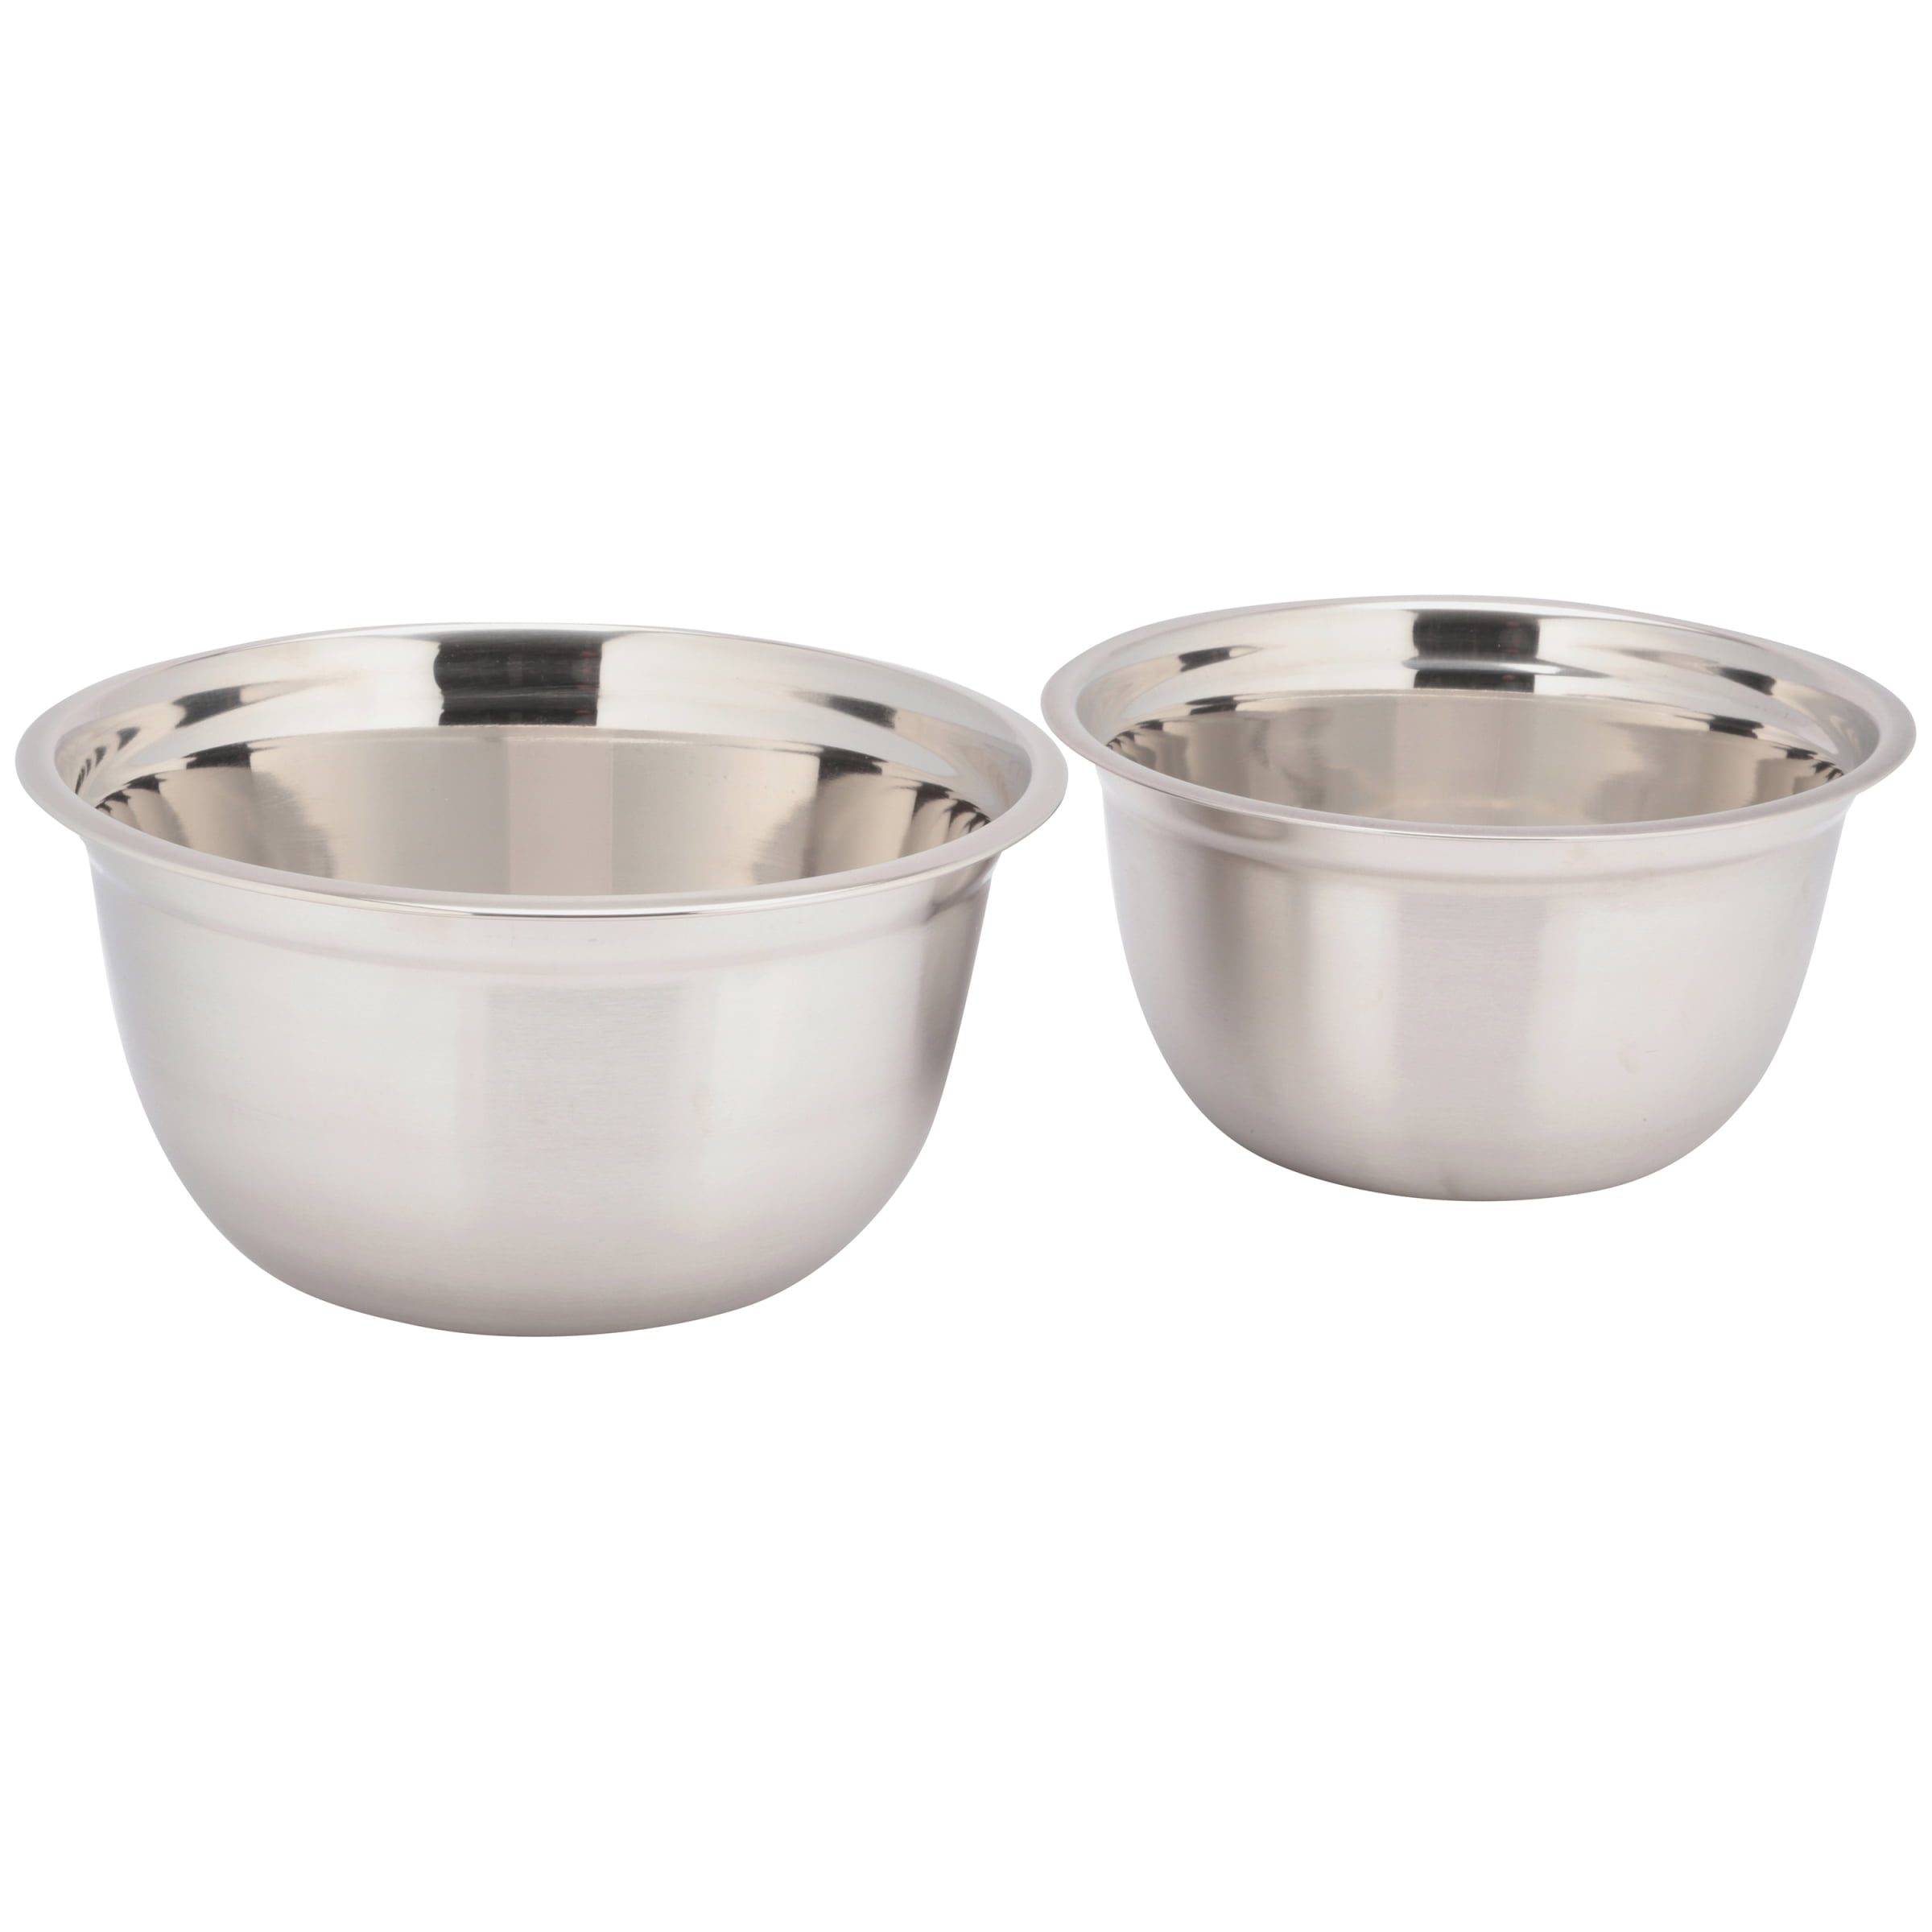 TOPBATHY Stainless Steel Mixing Bowls with Handle Mixing Batter Bowl for  Kitchen Mix Cook Bake Prep